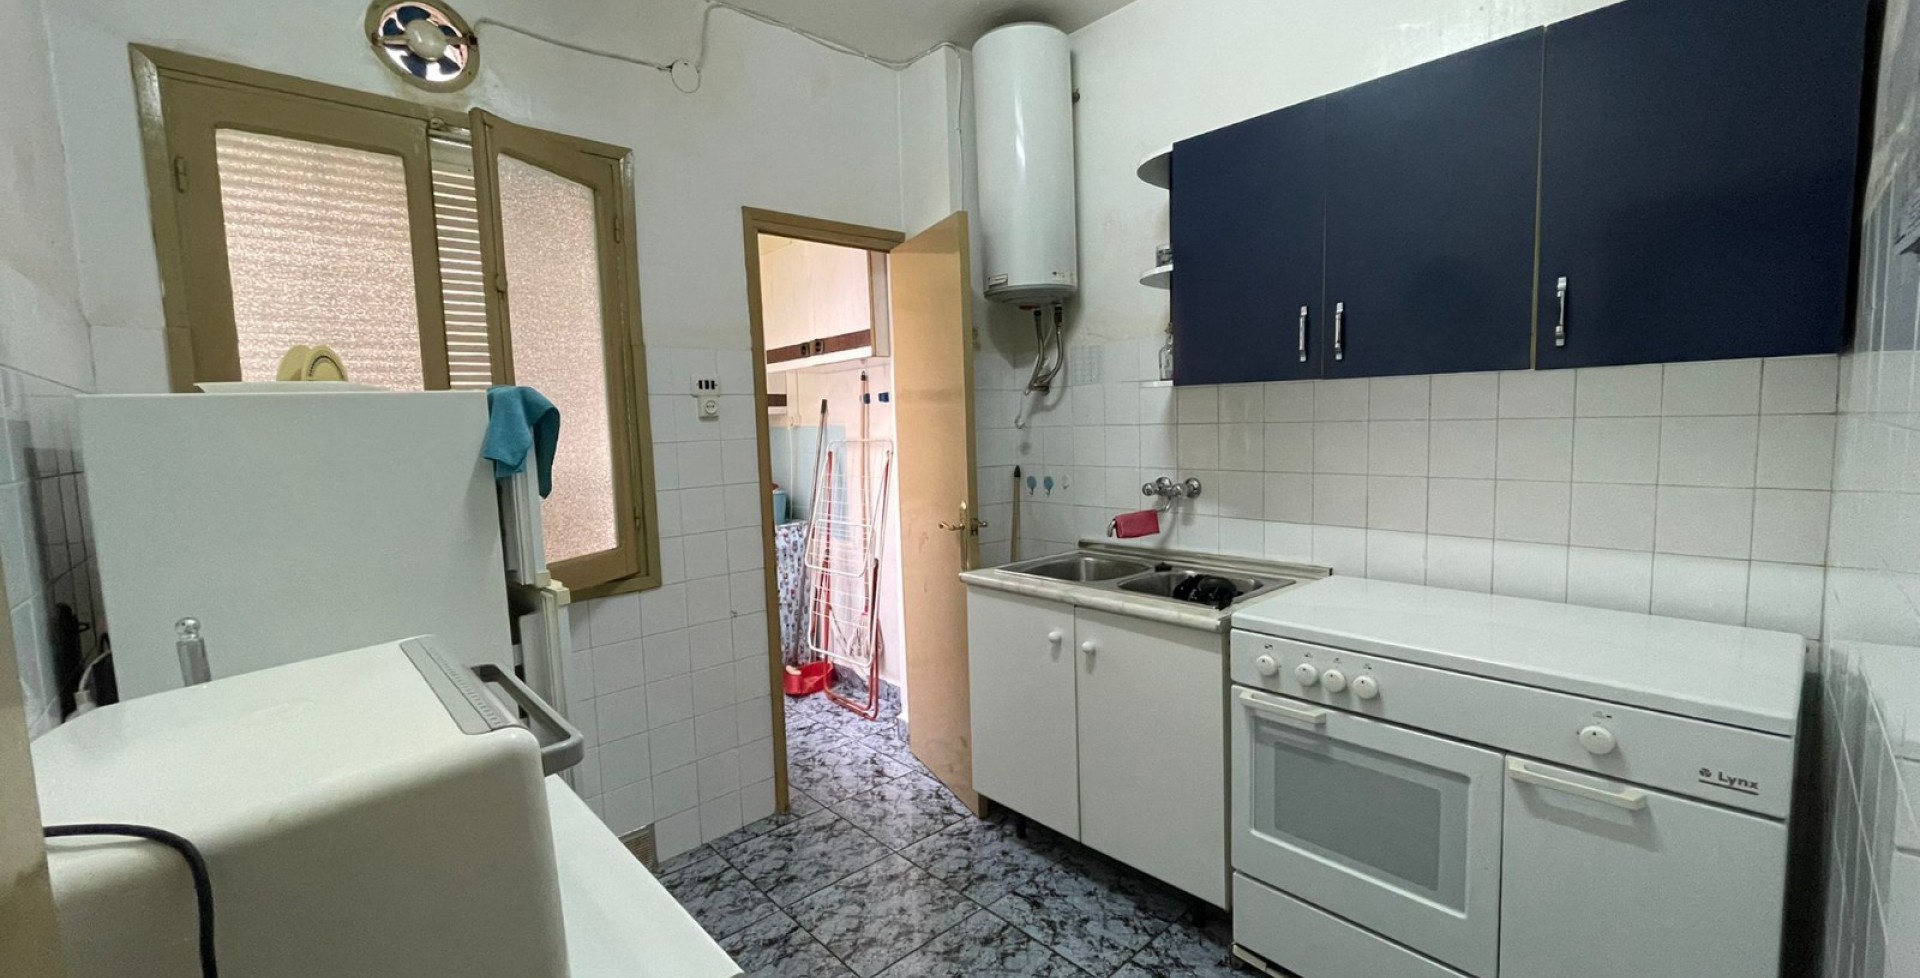 fitted kitchen in spacious flat Blanca, Murcia, Spain